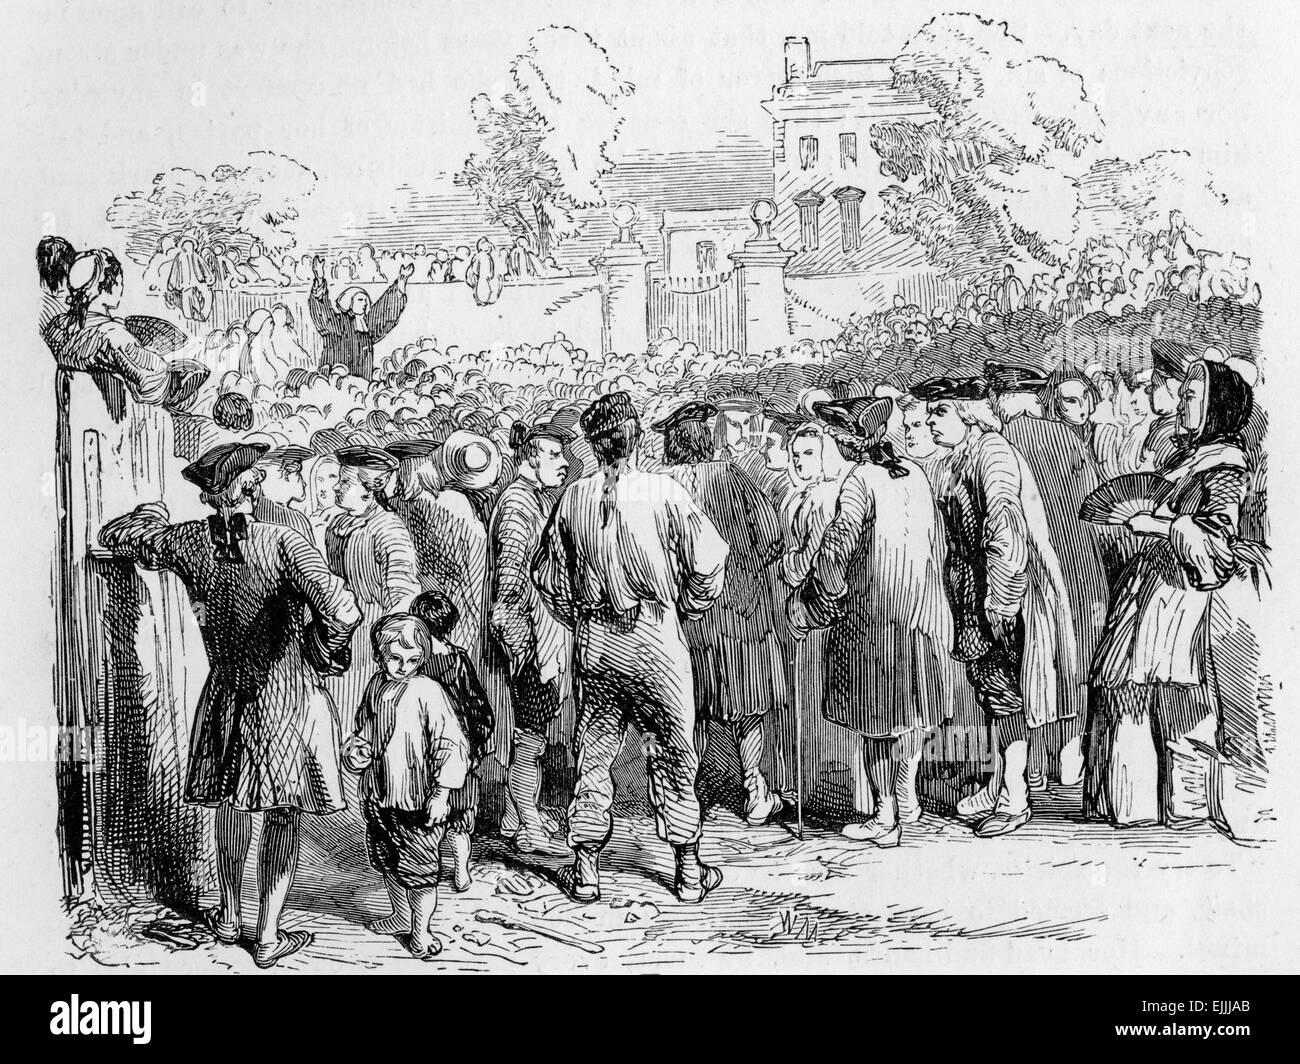 John Wesley preaching at an open air meeting, engraving from Selections from the Journal of John Wesley, 1891 Stock Photo